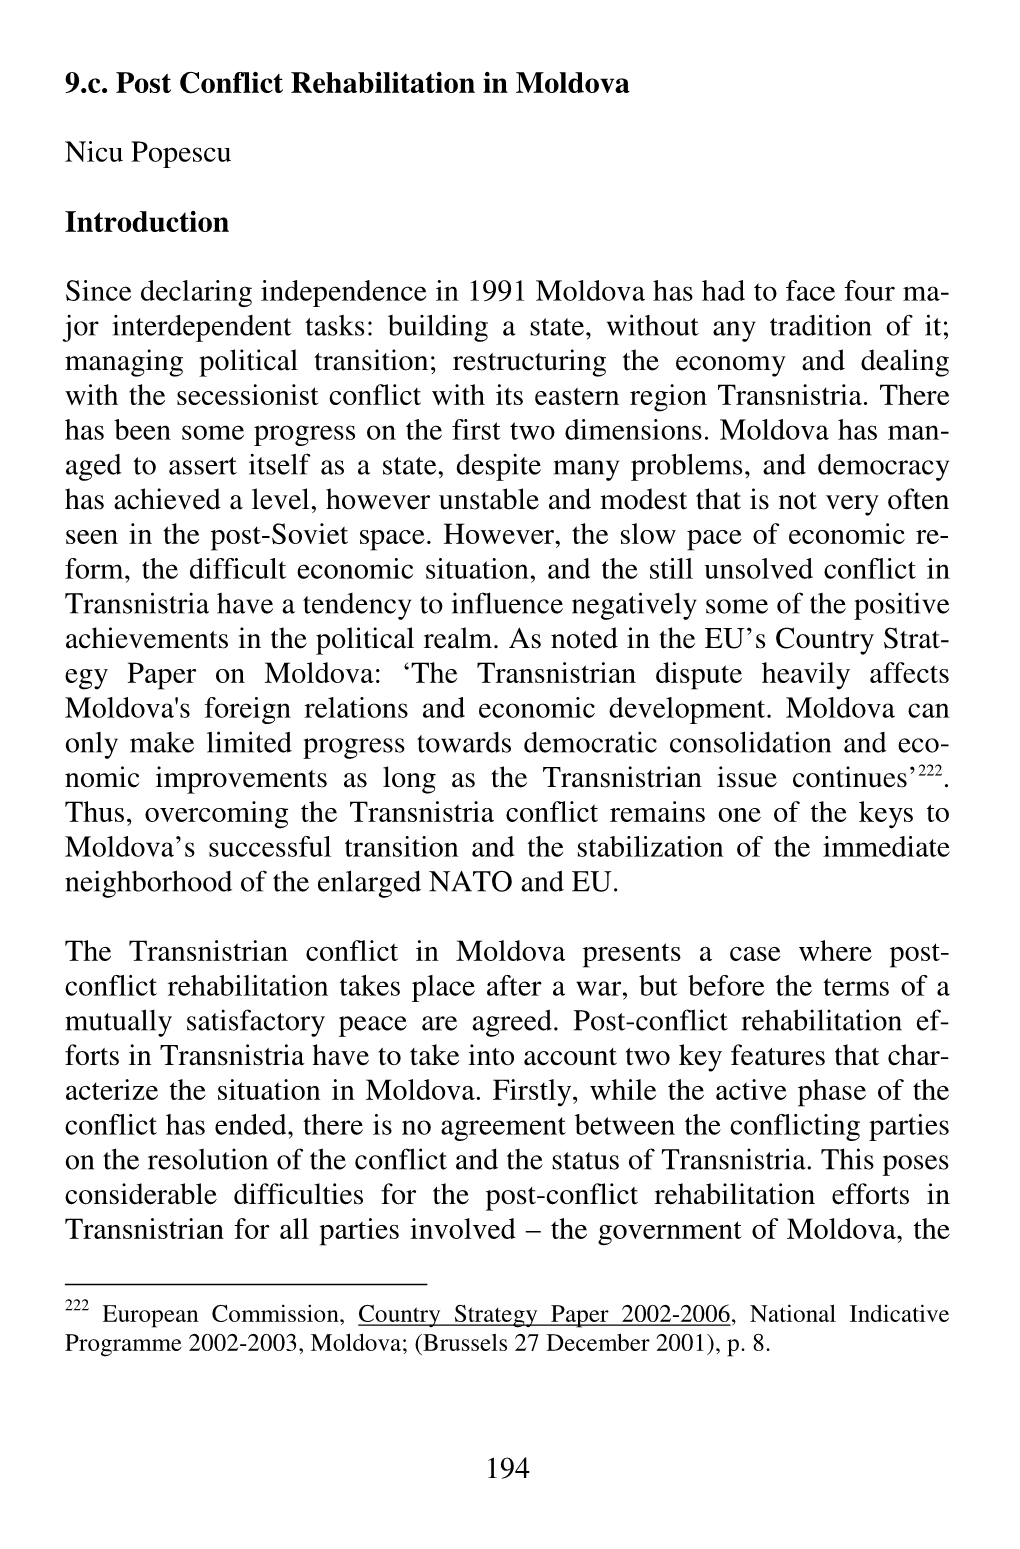 Post-Conflict Rehabilitation Ef- Forts in Transnistria Have to Take Into Account Two Key Features That Char- Acterize the Situation in Moldova